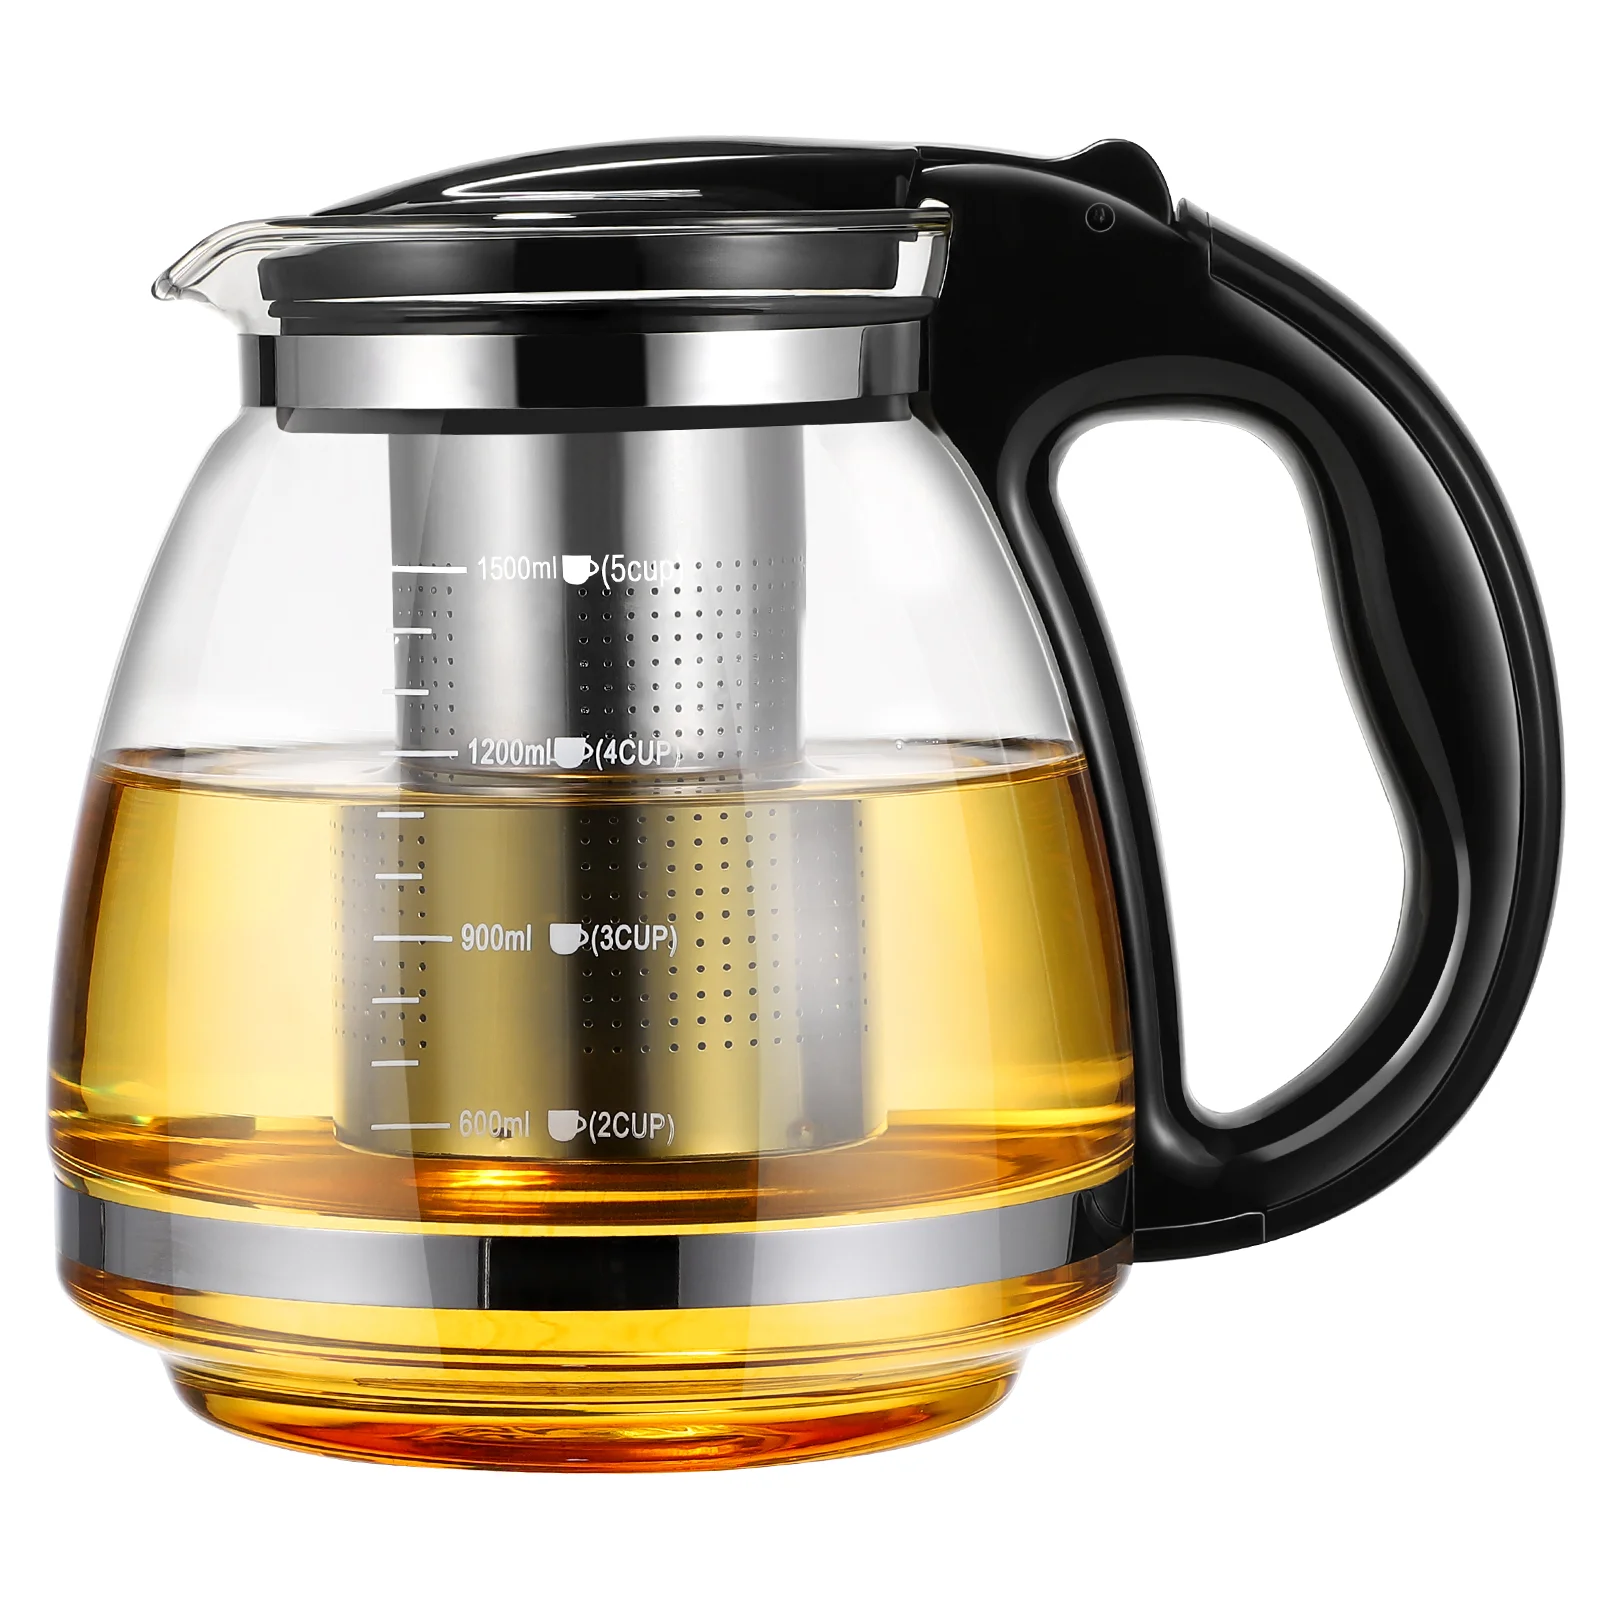 

Stainless Steel Tea Kettle Small Glass Teapot 1500ml Leak Kungfu Teaware Stovetop Safe Removable Infuser Coffee and tableware